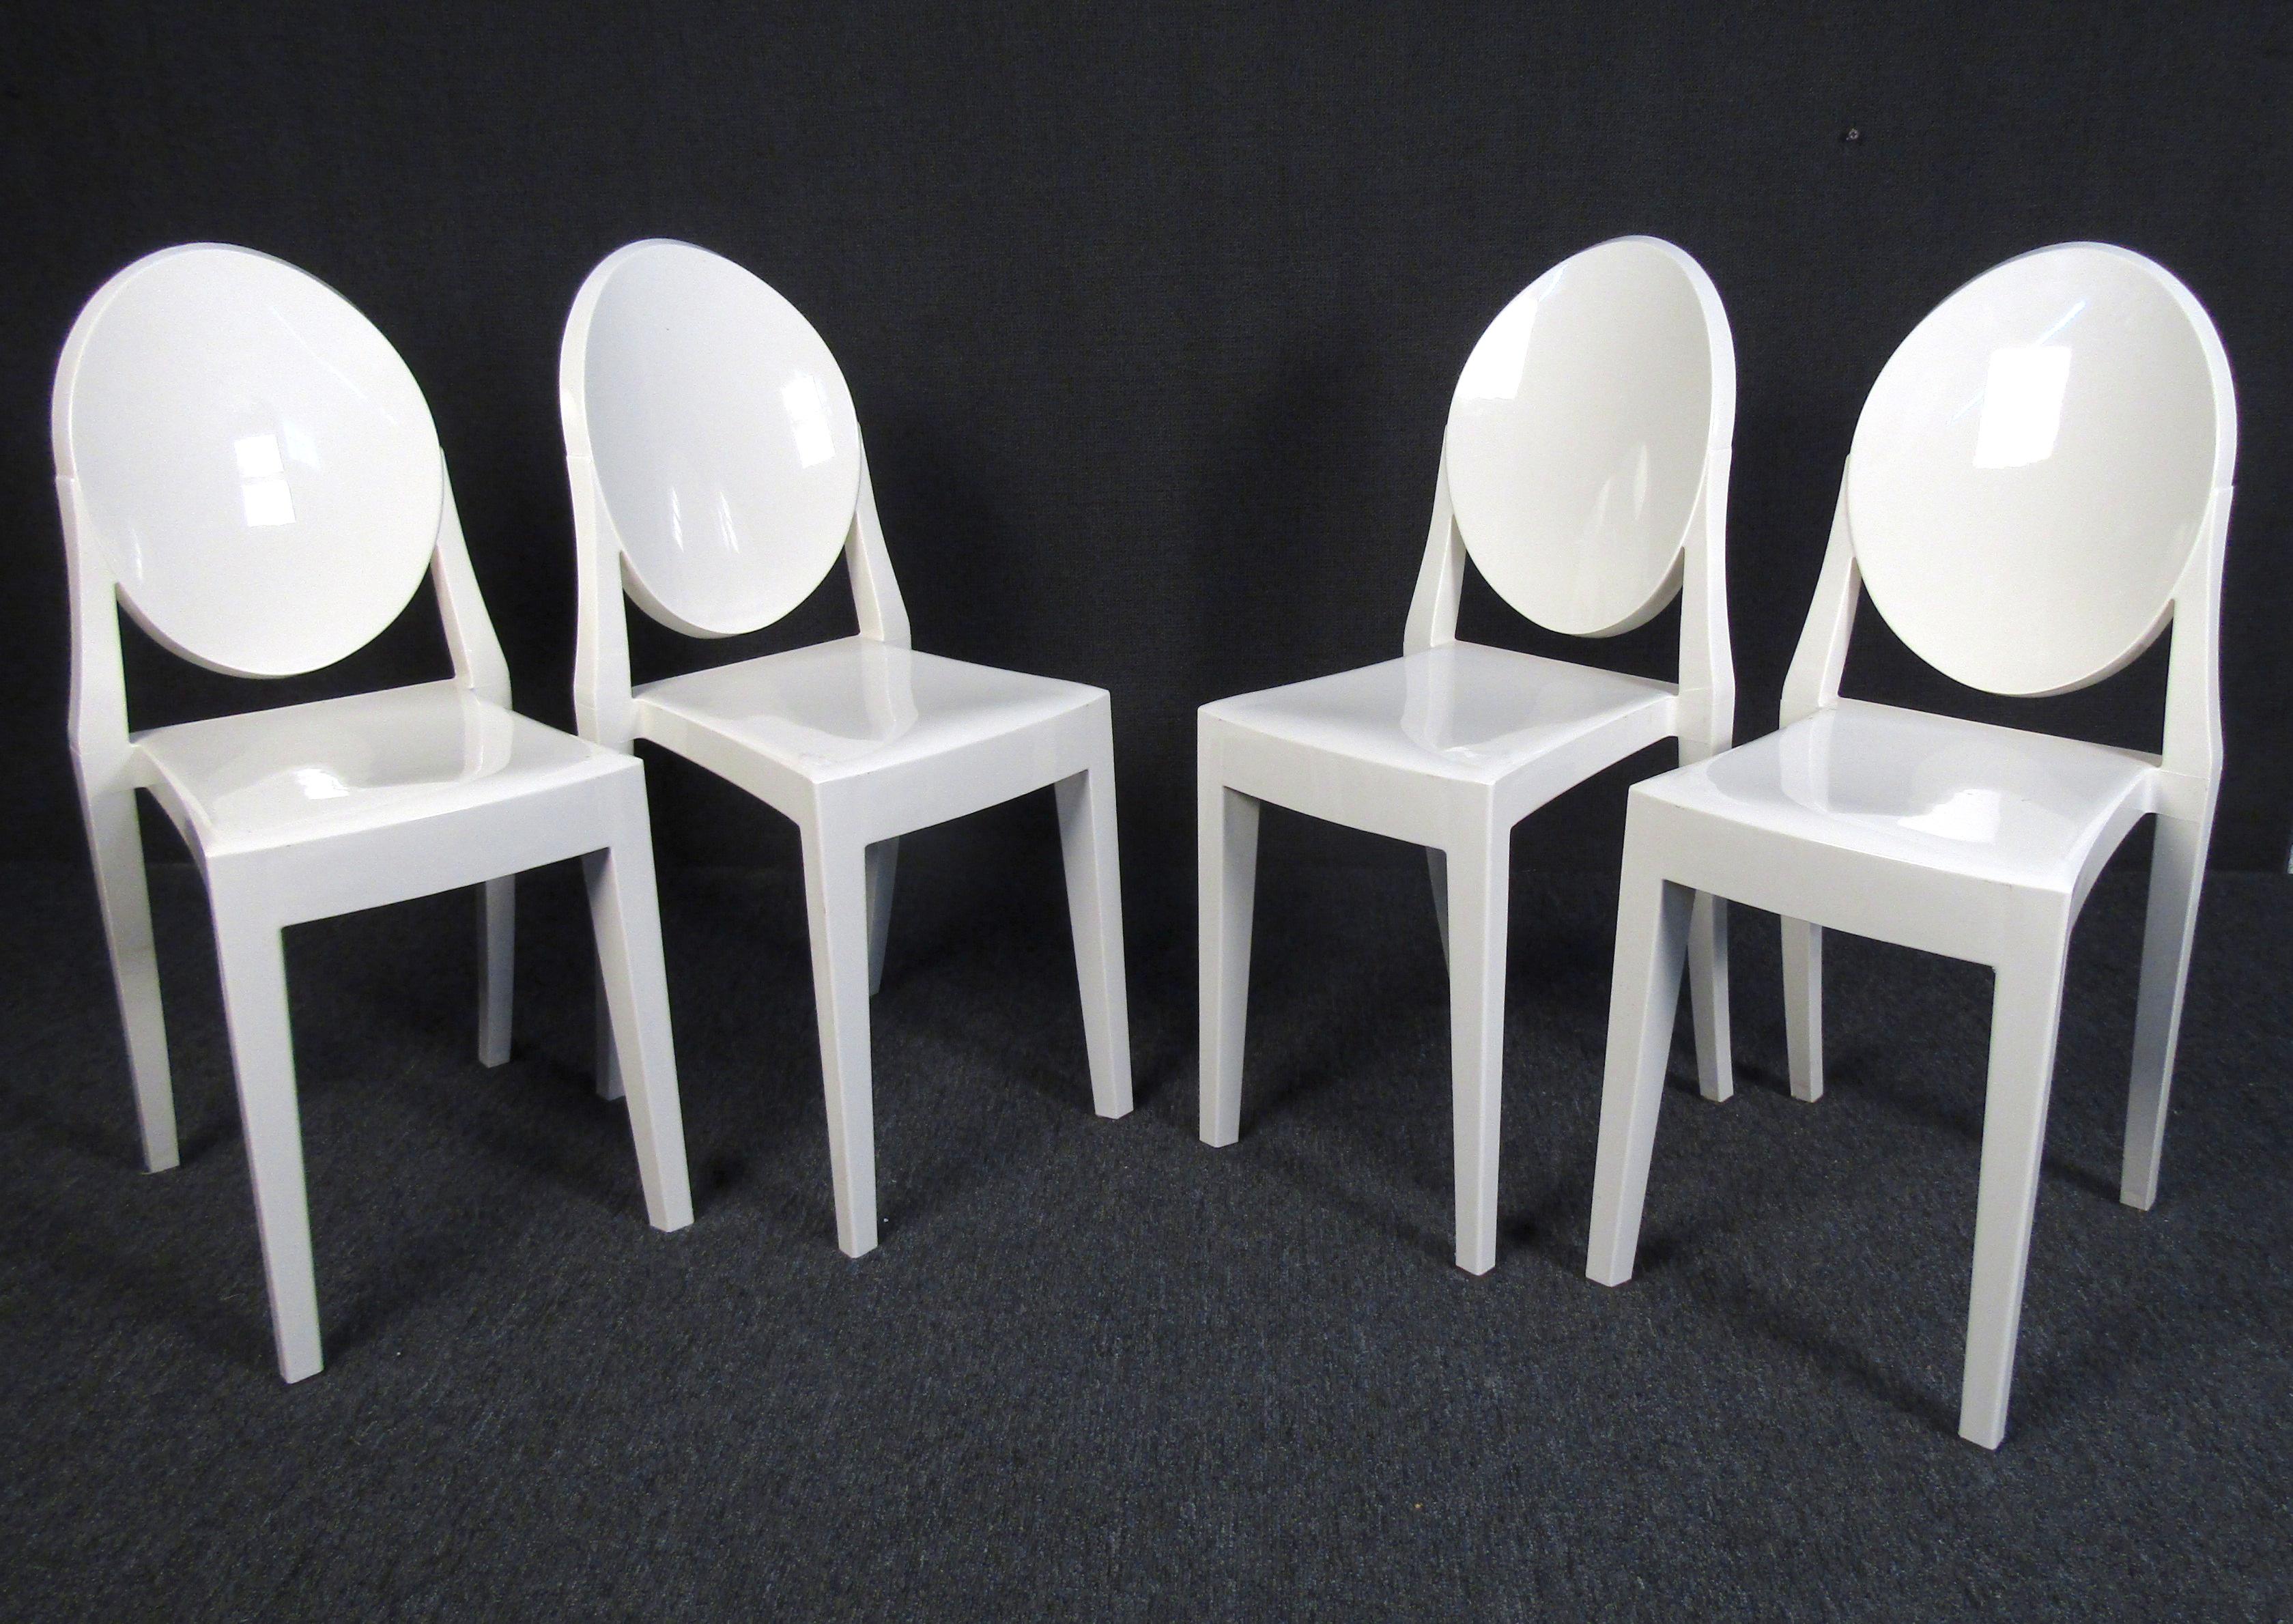 This set of four Mid-Century Modern chairs feature a unique minimal design in solid white plastic. Both understated and stylish, these chairs can make a statement in any room or setting. Please confirm item location with dealer (NY or NJ).